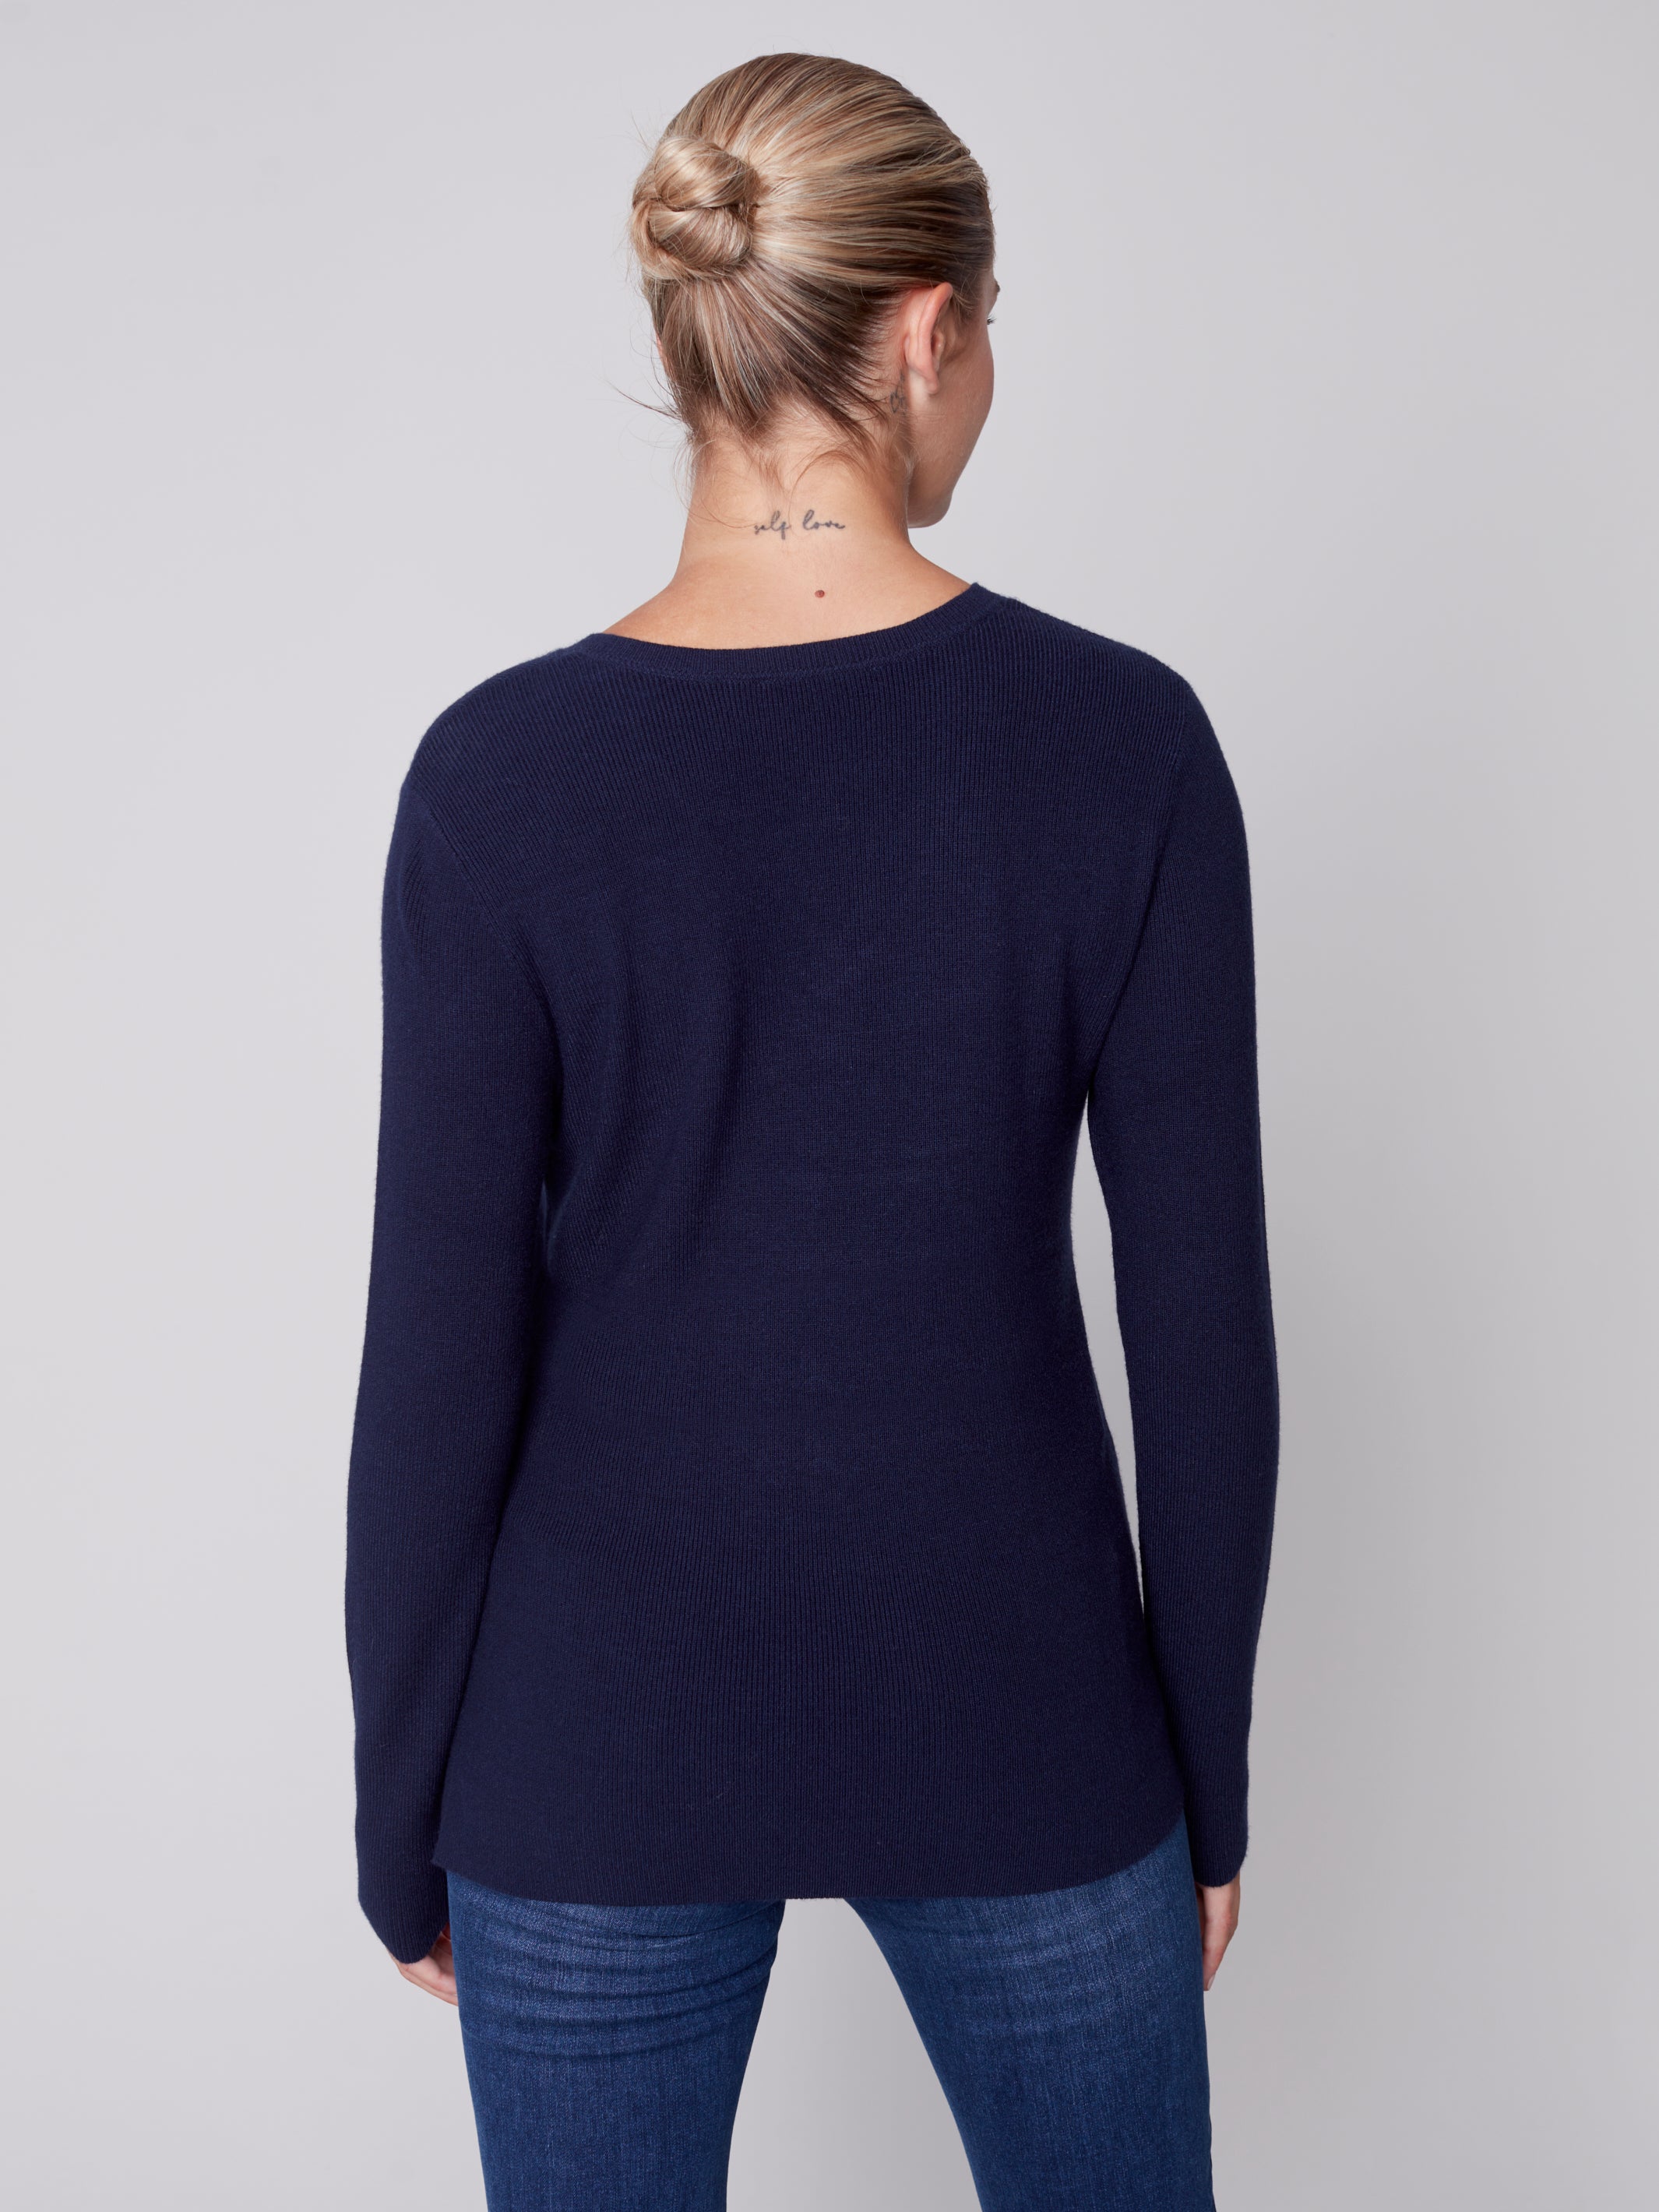 V-Neck Sweater with Grommet Details by Charlie B